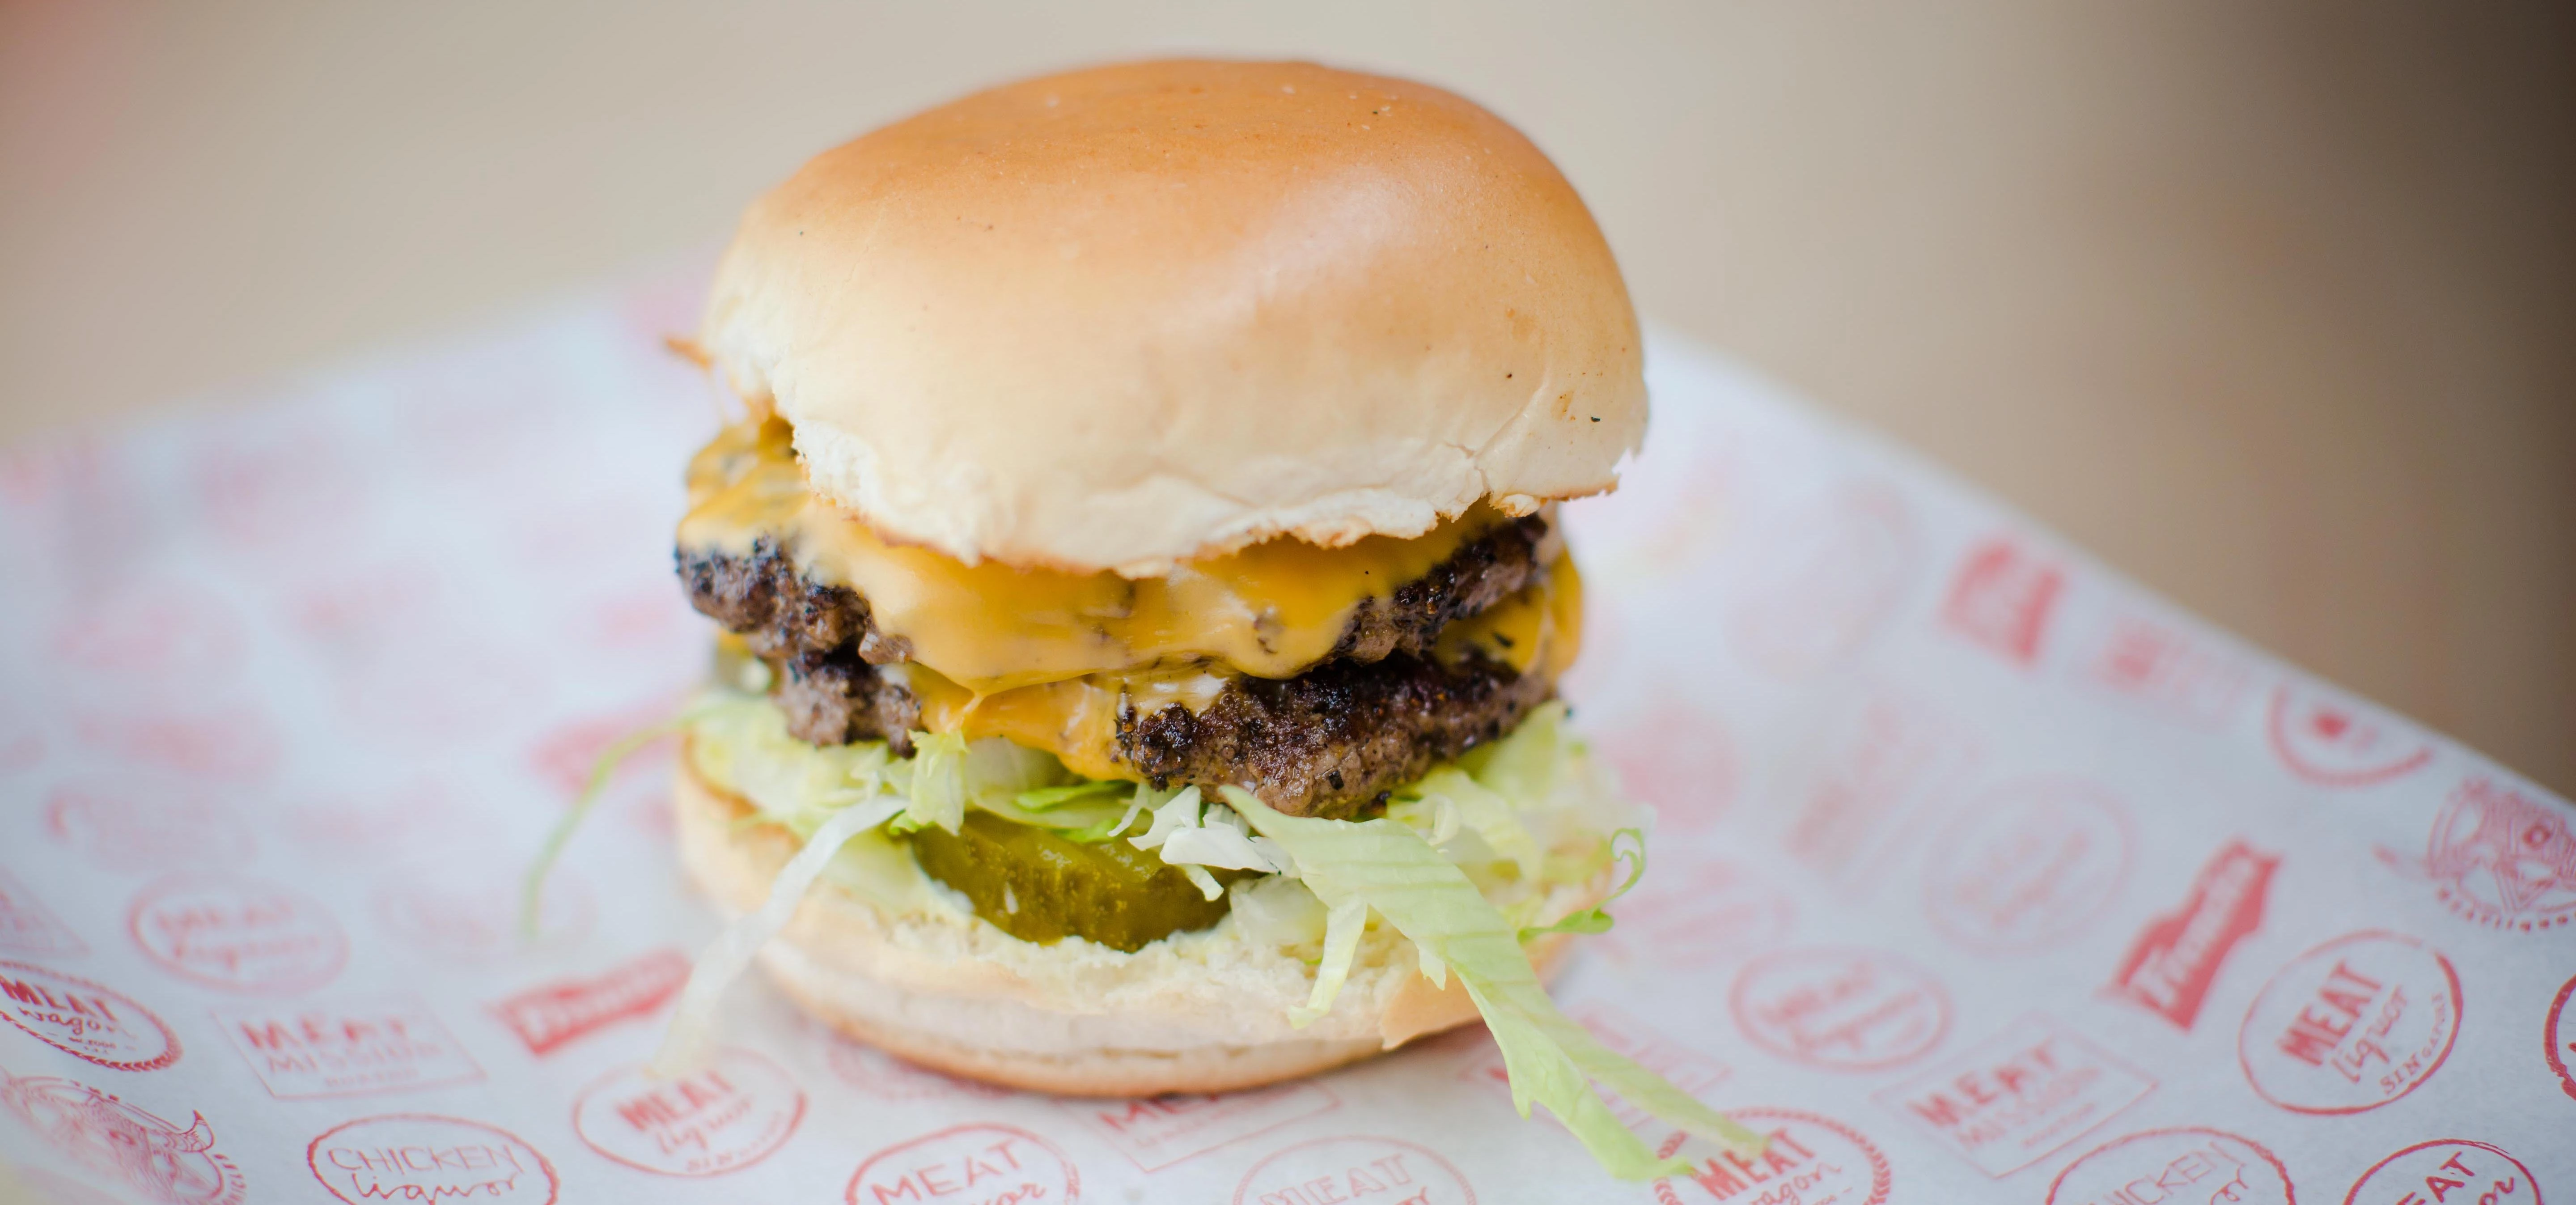 A burger from MEATLiquor, who have just secured a new site near Kings Cross Station.